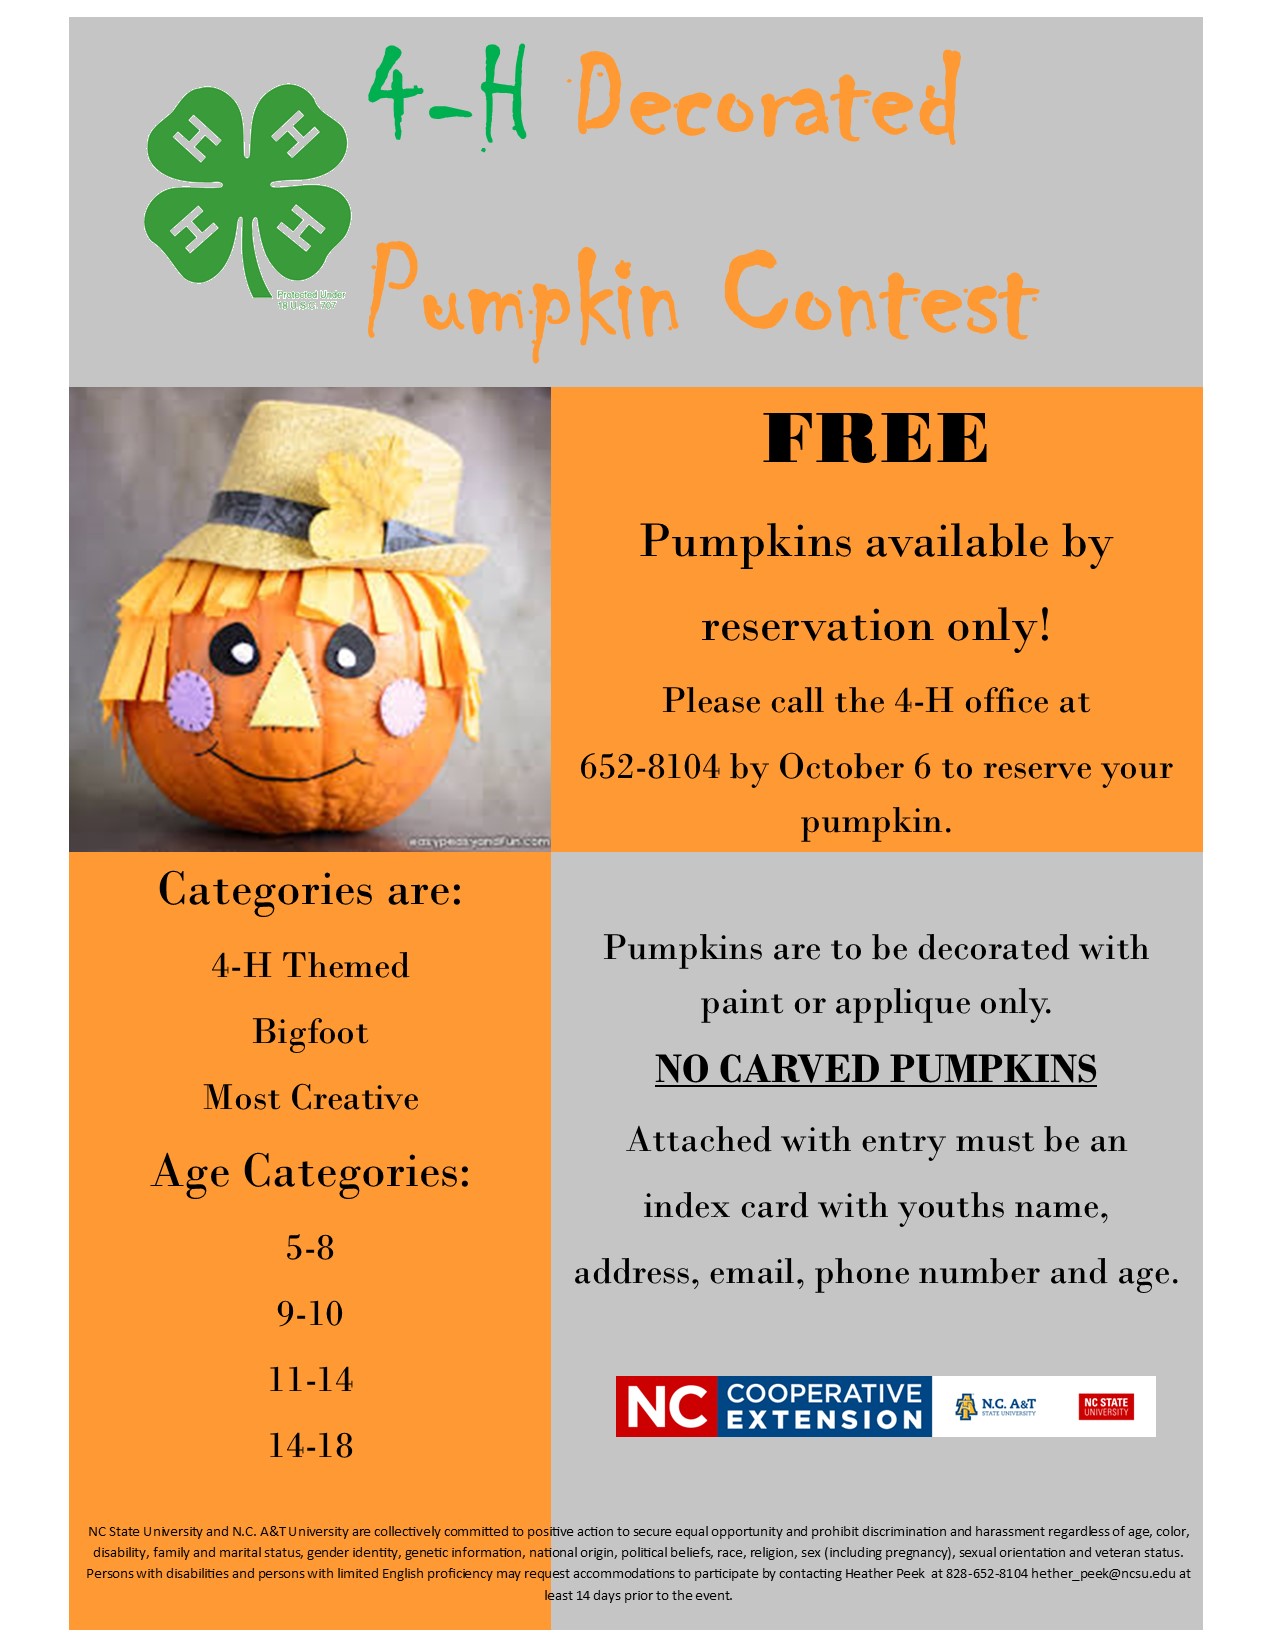 McDowell County 4H Decorated Pumpkin Contest N.C. Cooperative Extension